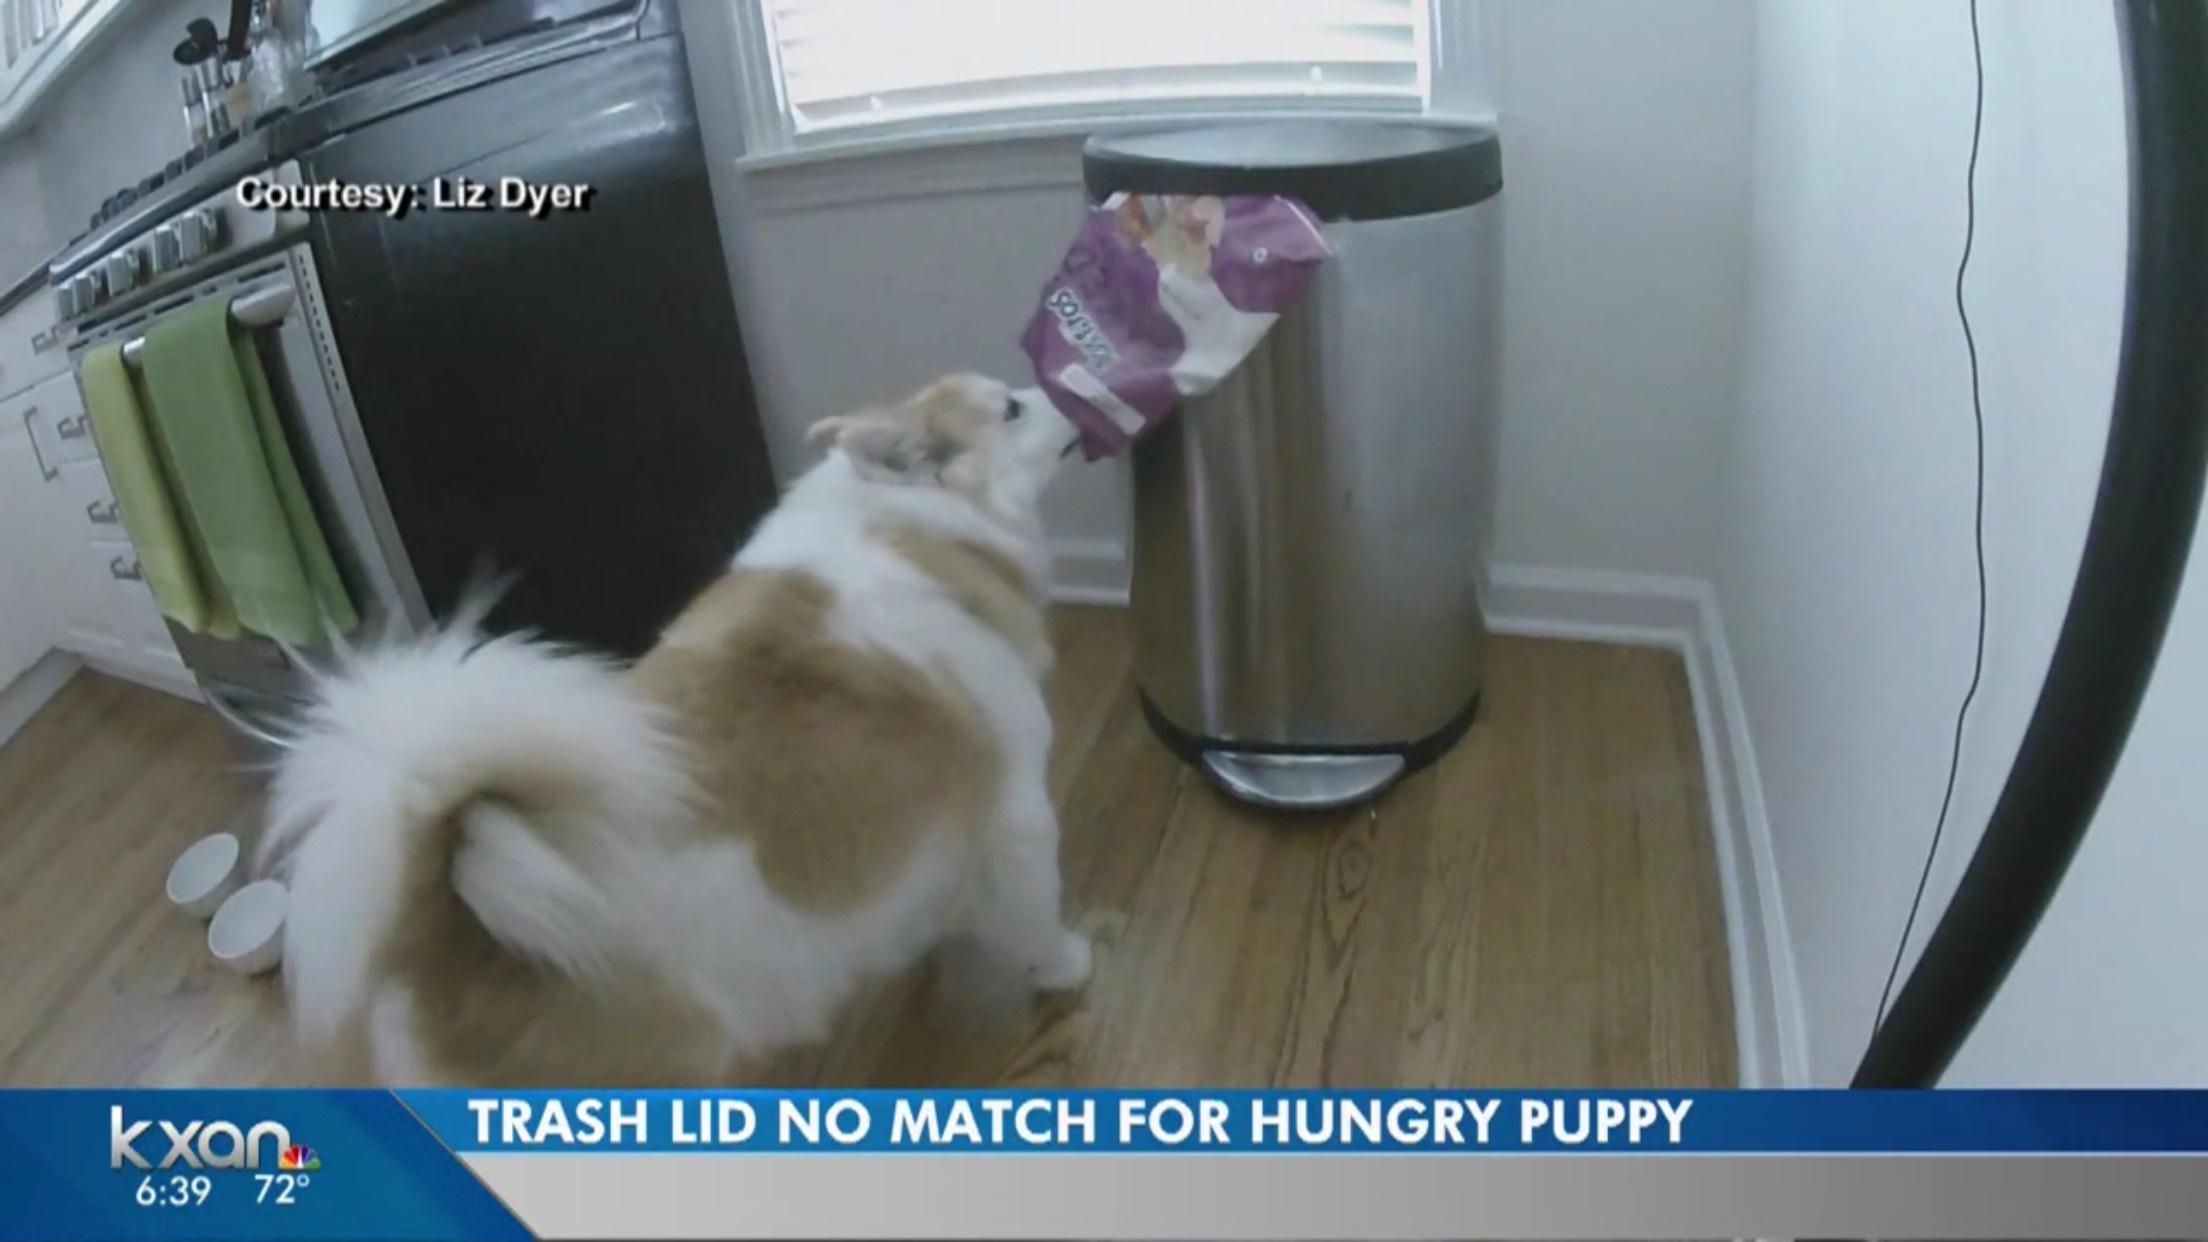 Trash Lid No Match For Hungry Puppy